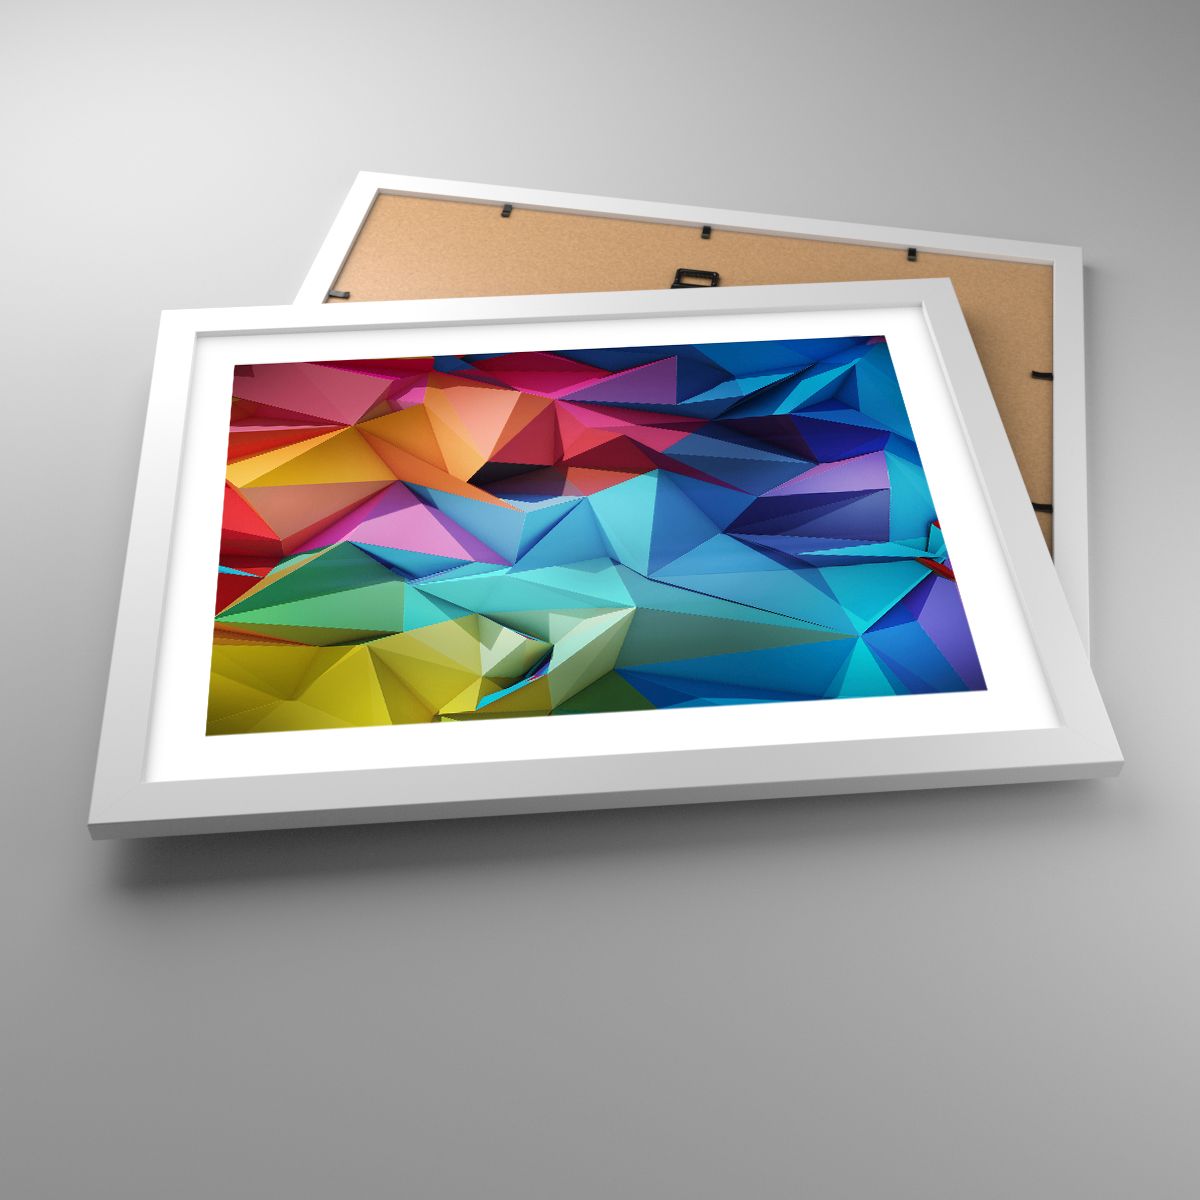 Poster Abstraction, Poster 3D, Poster Graphics, Poster Art, Poster Fashionable Shapes